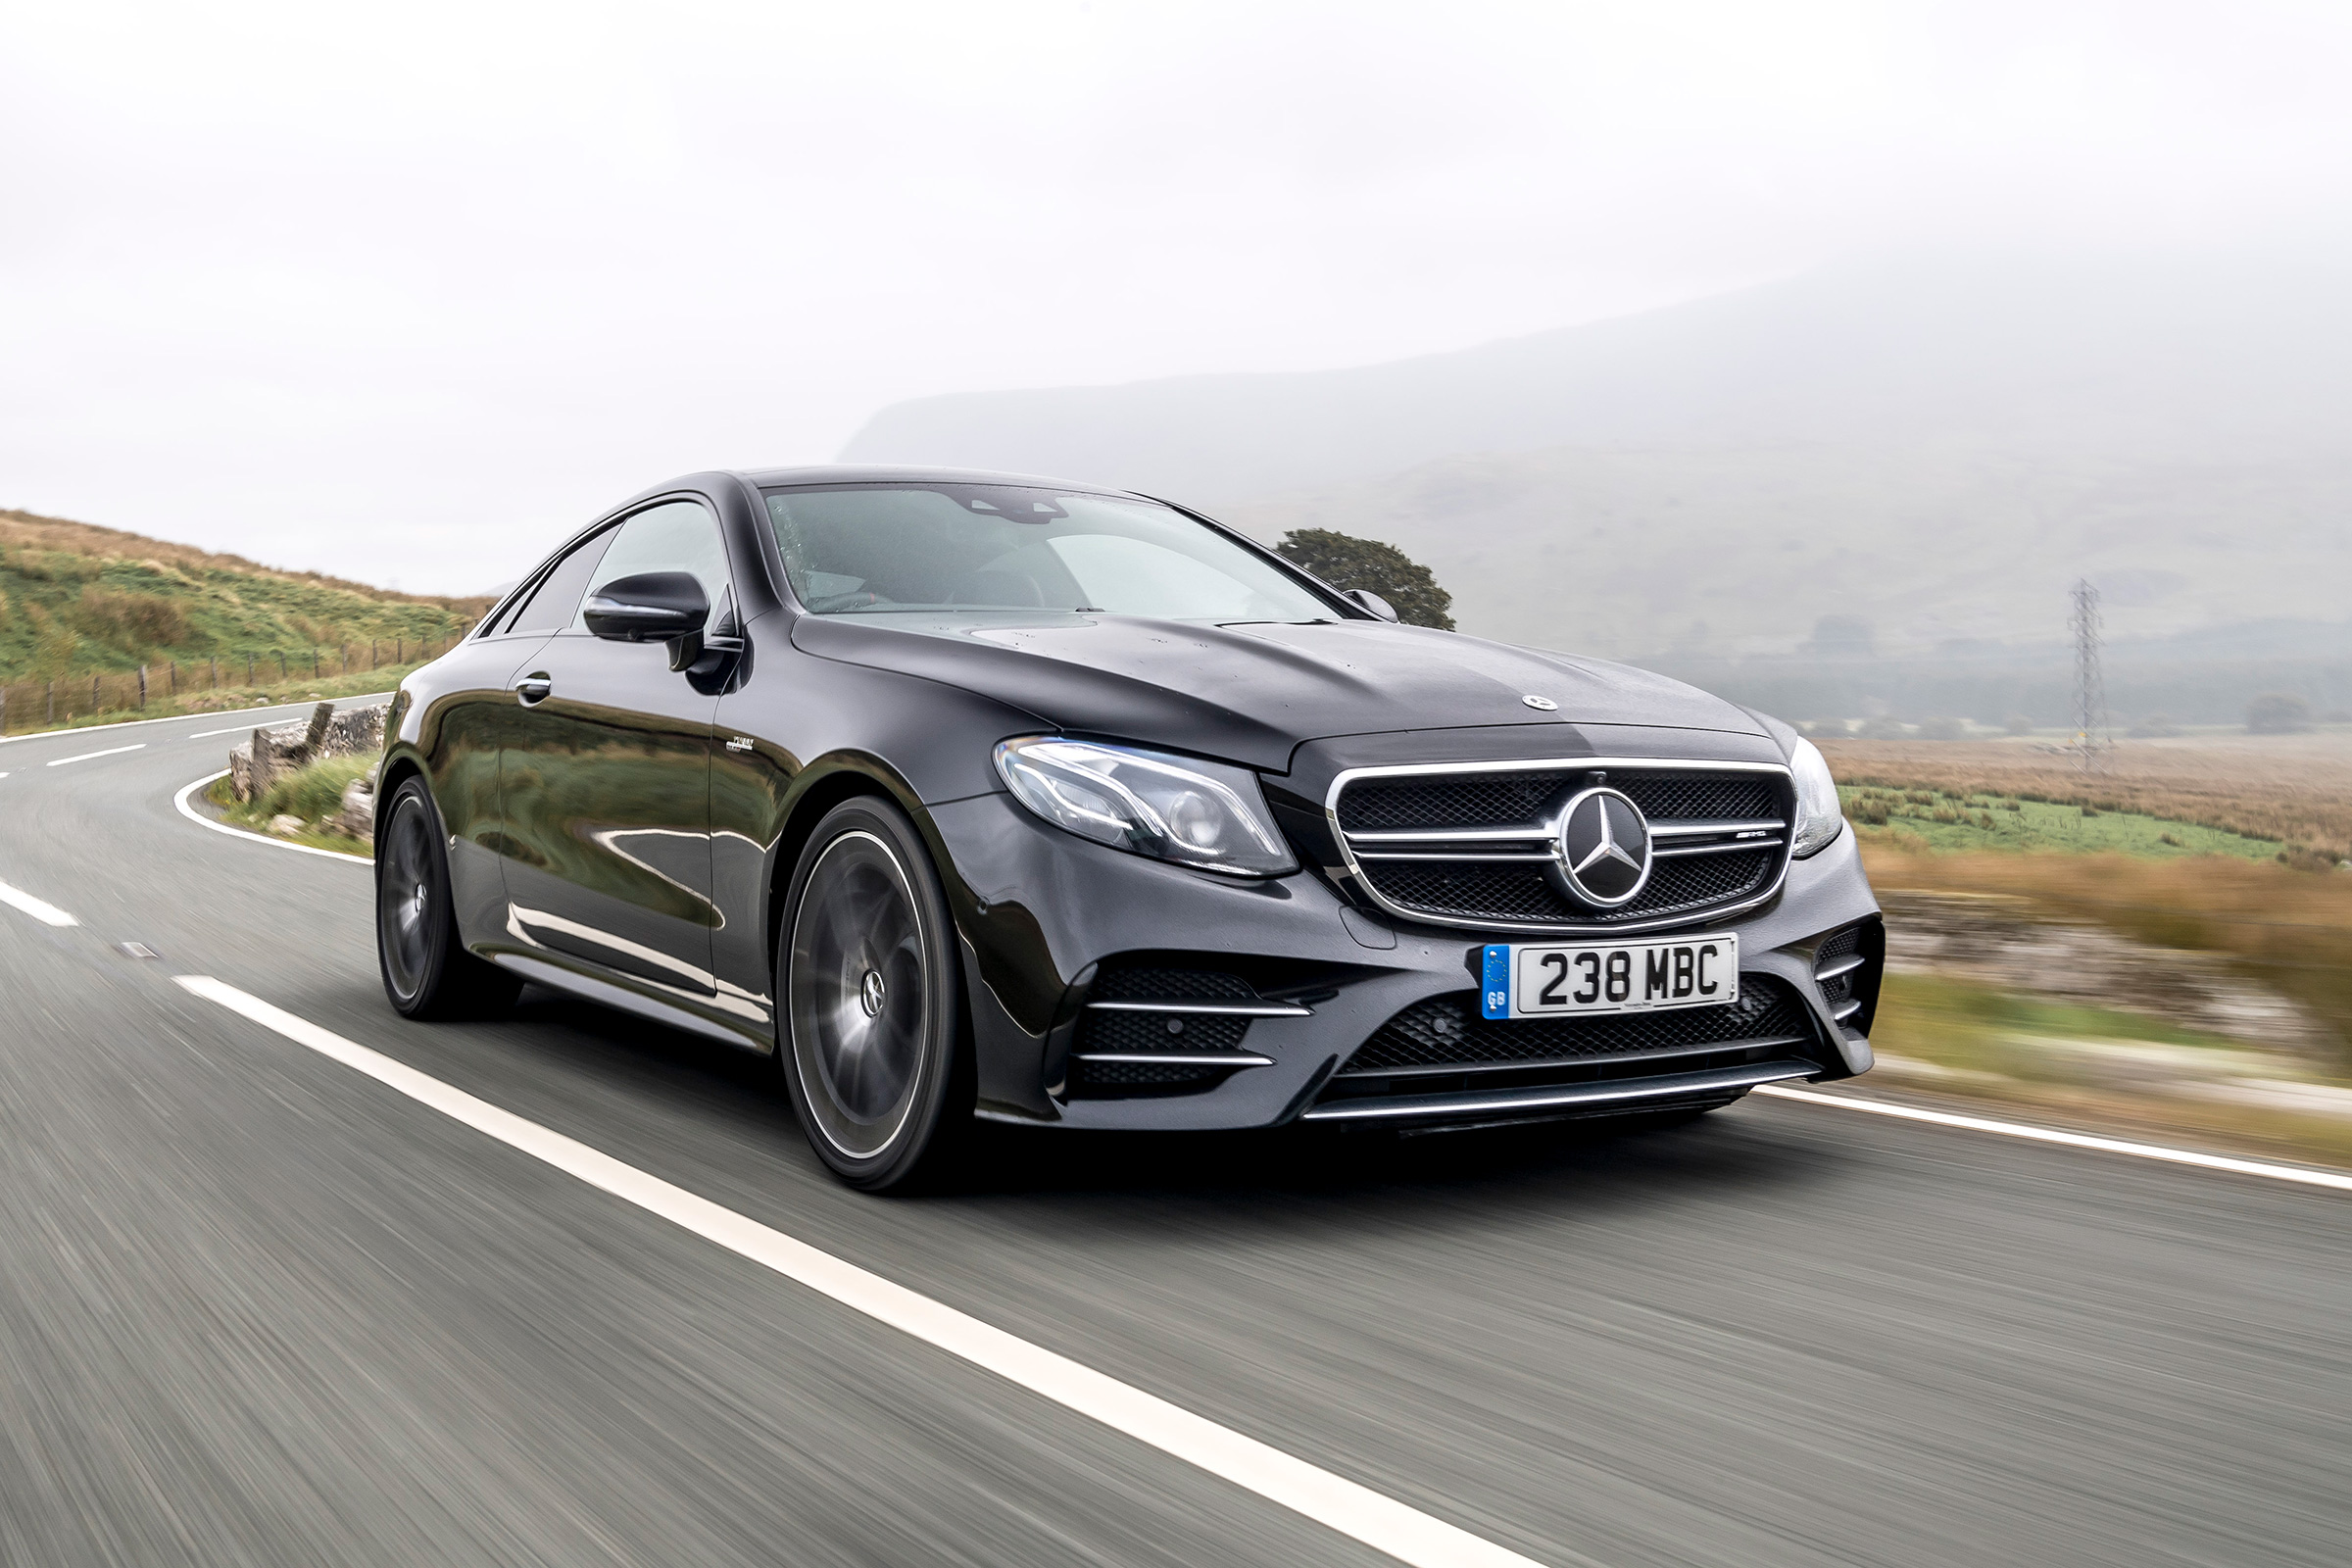 Mercedes Amg E53 4matic Coupe Review The Mild Hybrid Amg